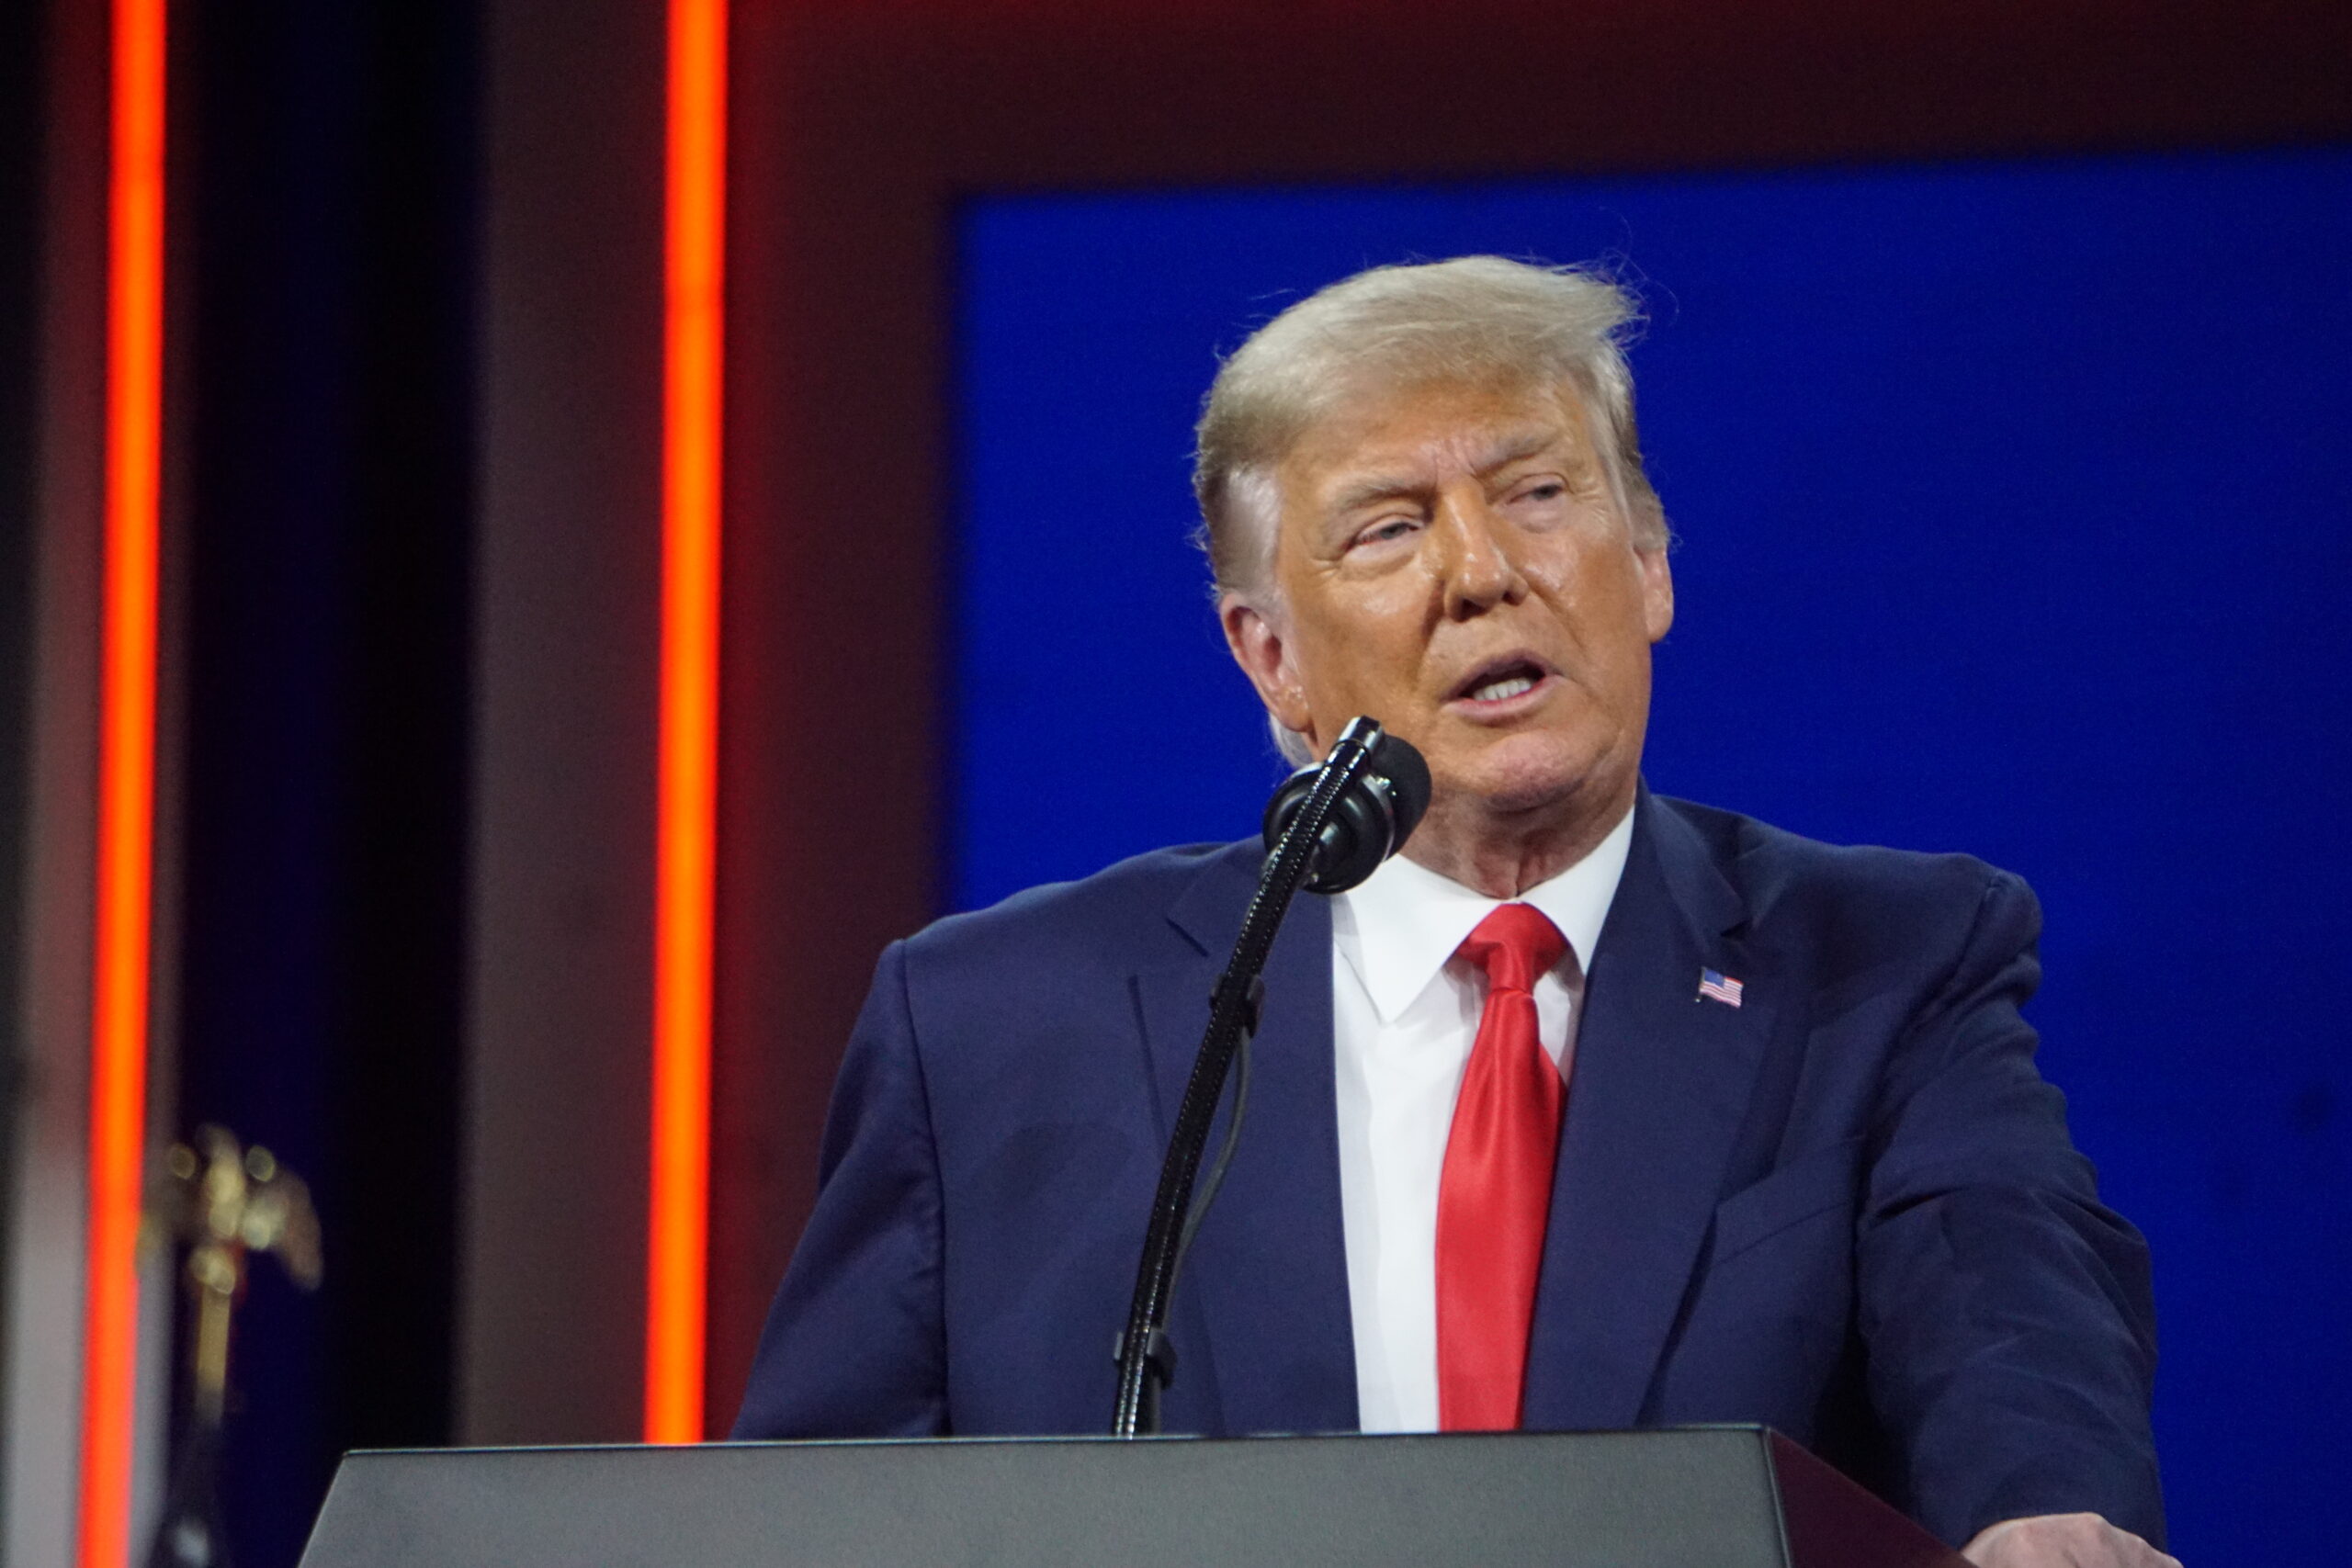 Trump At CPAC Says 'The Incredible Journey' Is 'Far From Being Over'